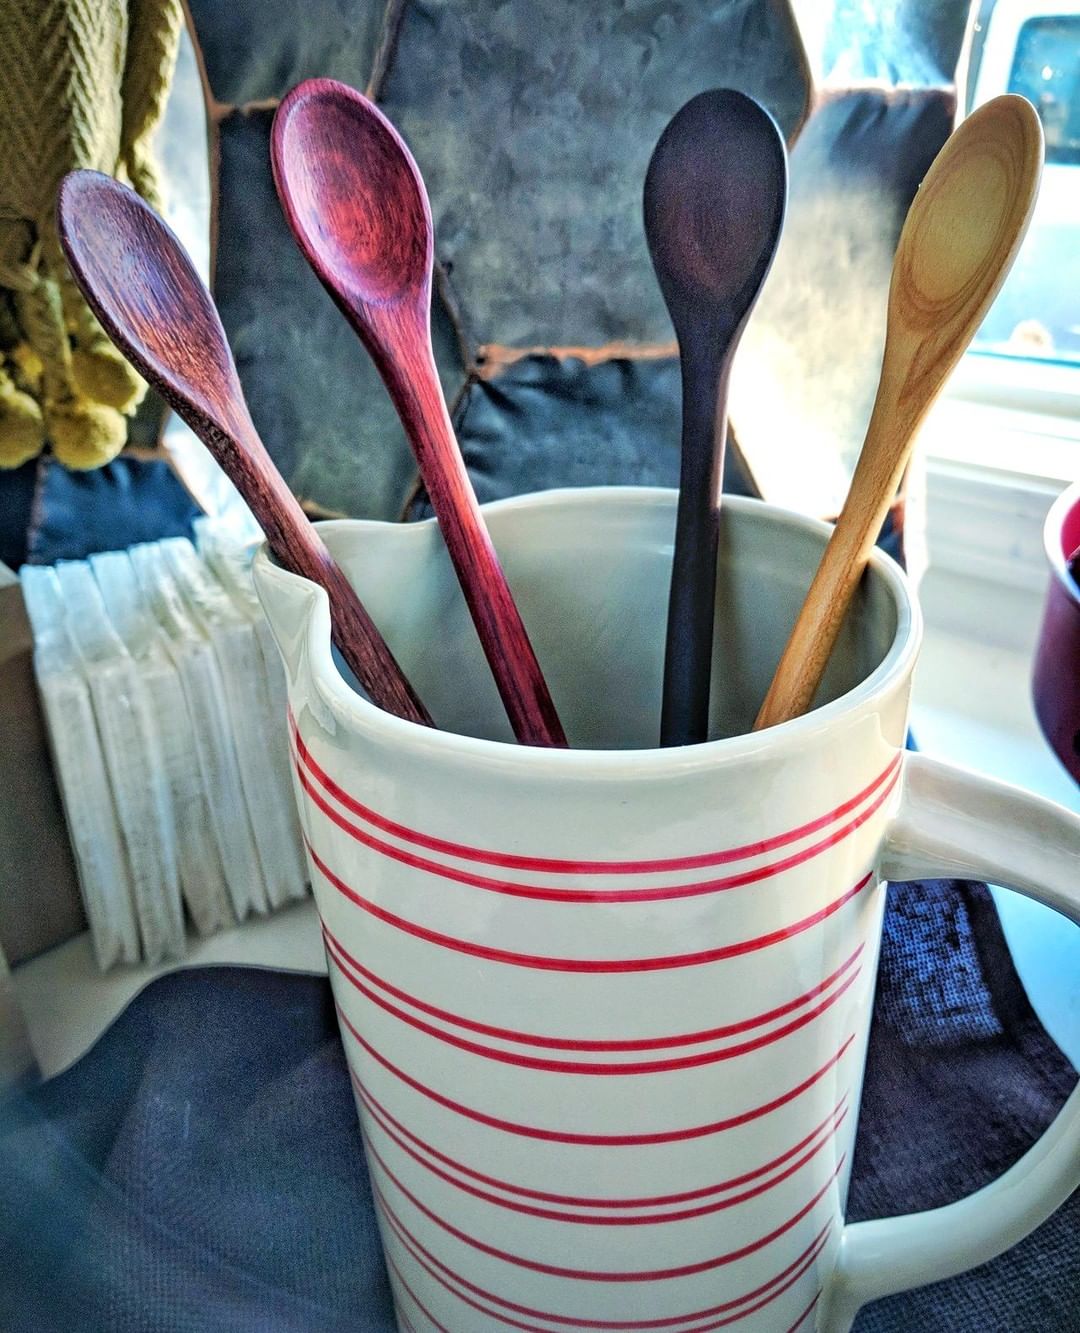 Handmade wooden stirring and tasting spoons